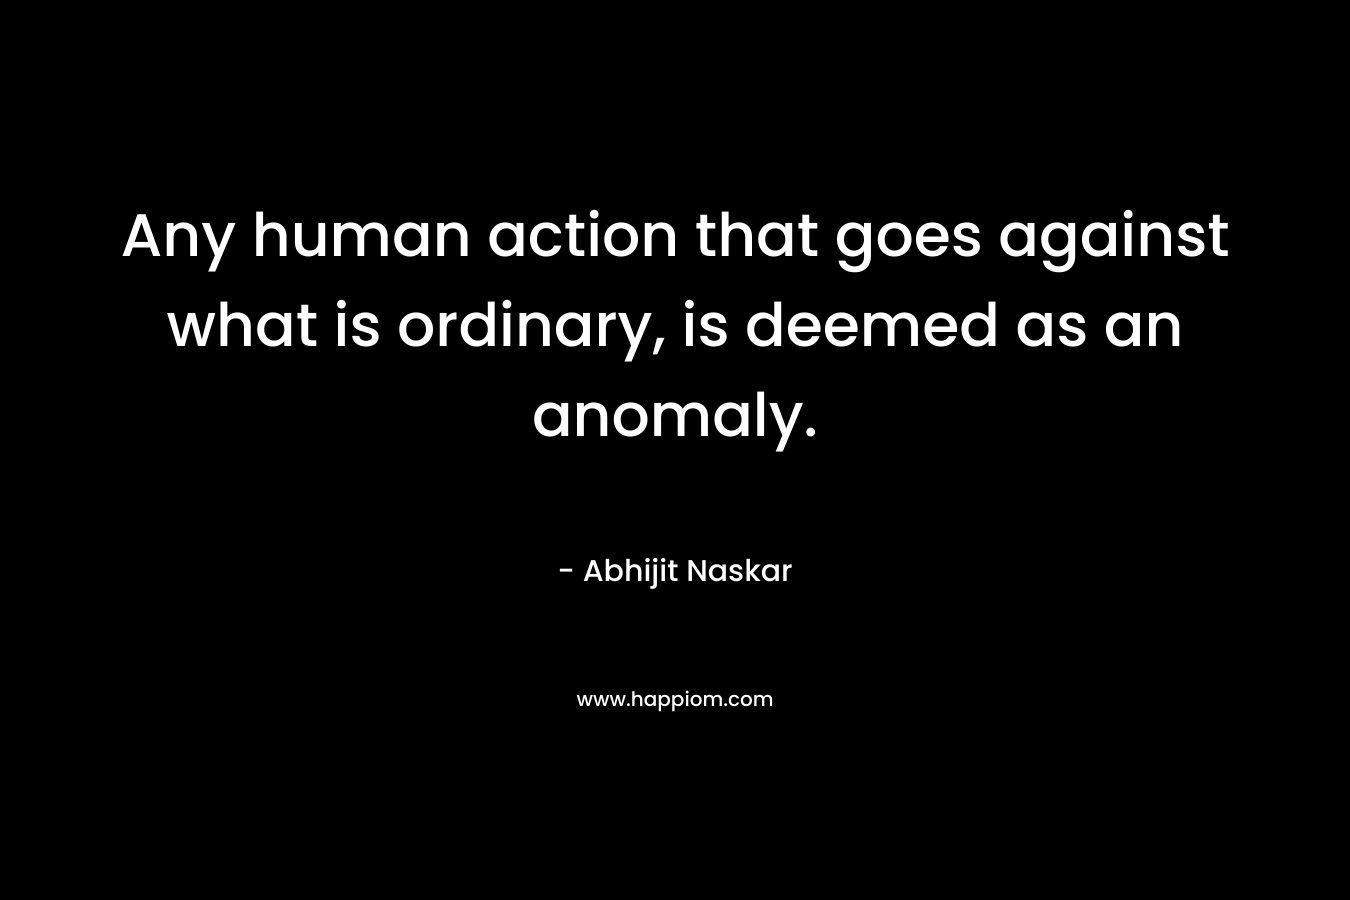 Any human action that goes against what is ordinary, is deemed as an anomaly.